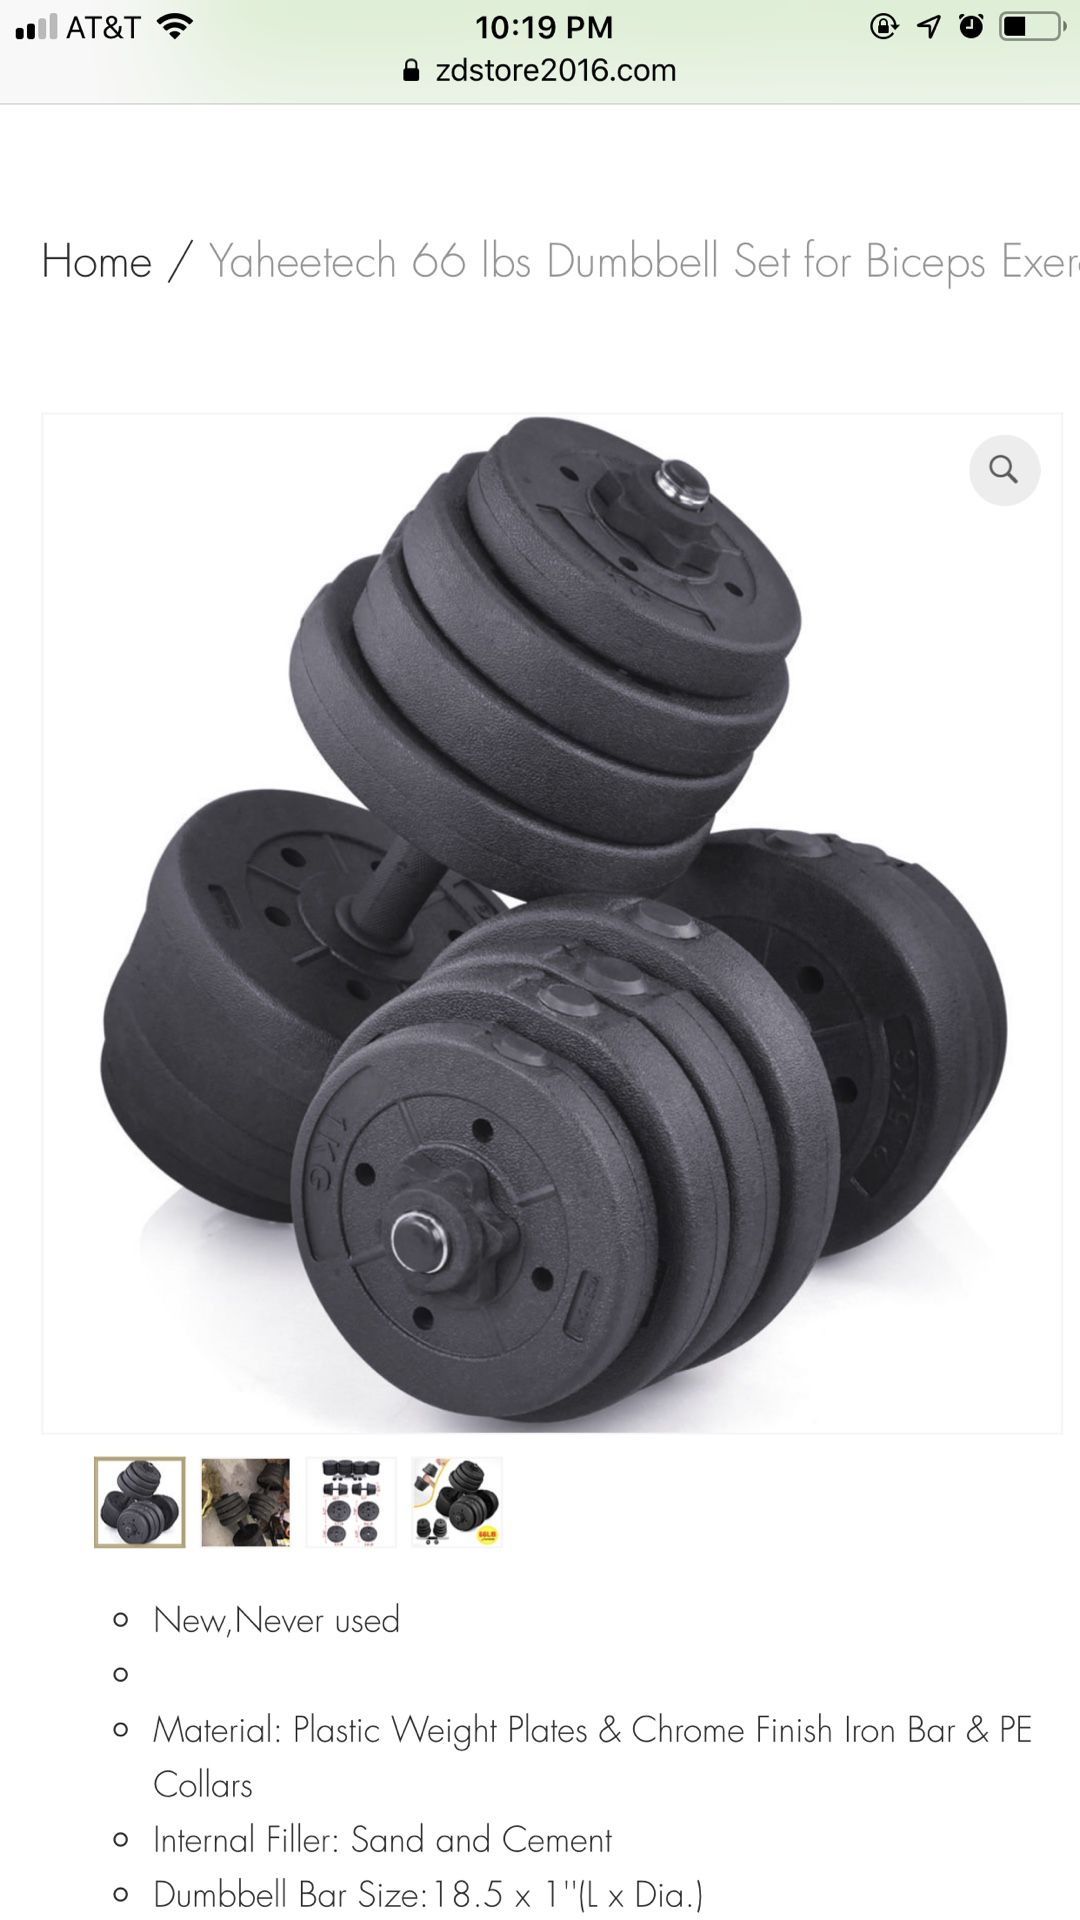 Yaheetech 66 lbs Dumbbell Set for Biceps Exercise Fitness Weight Training